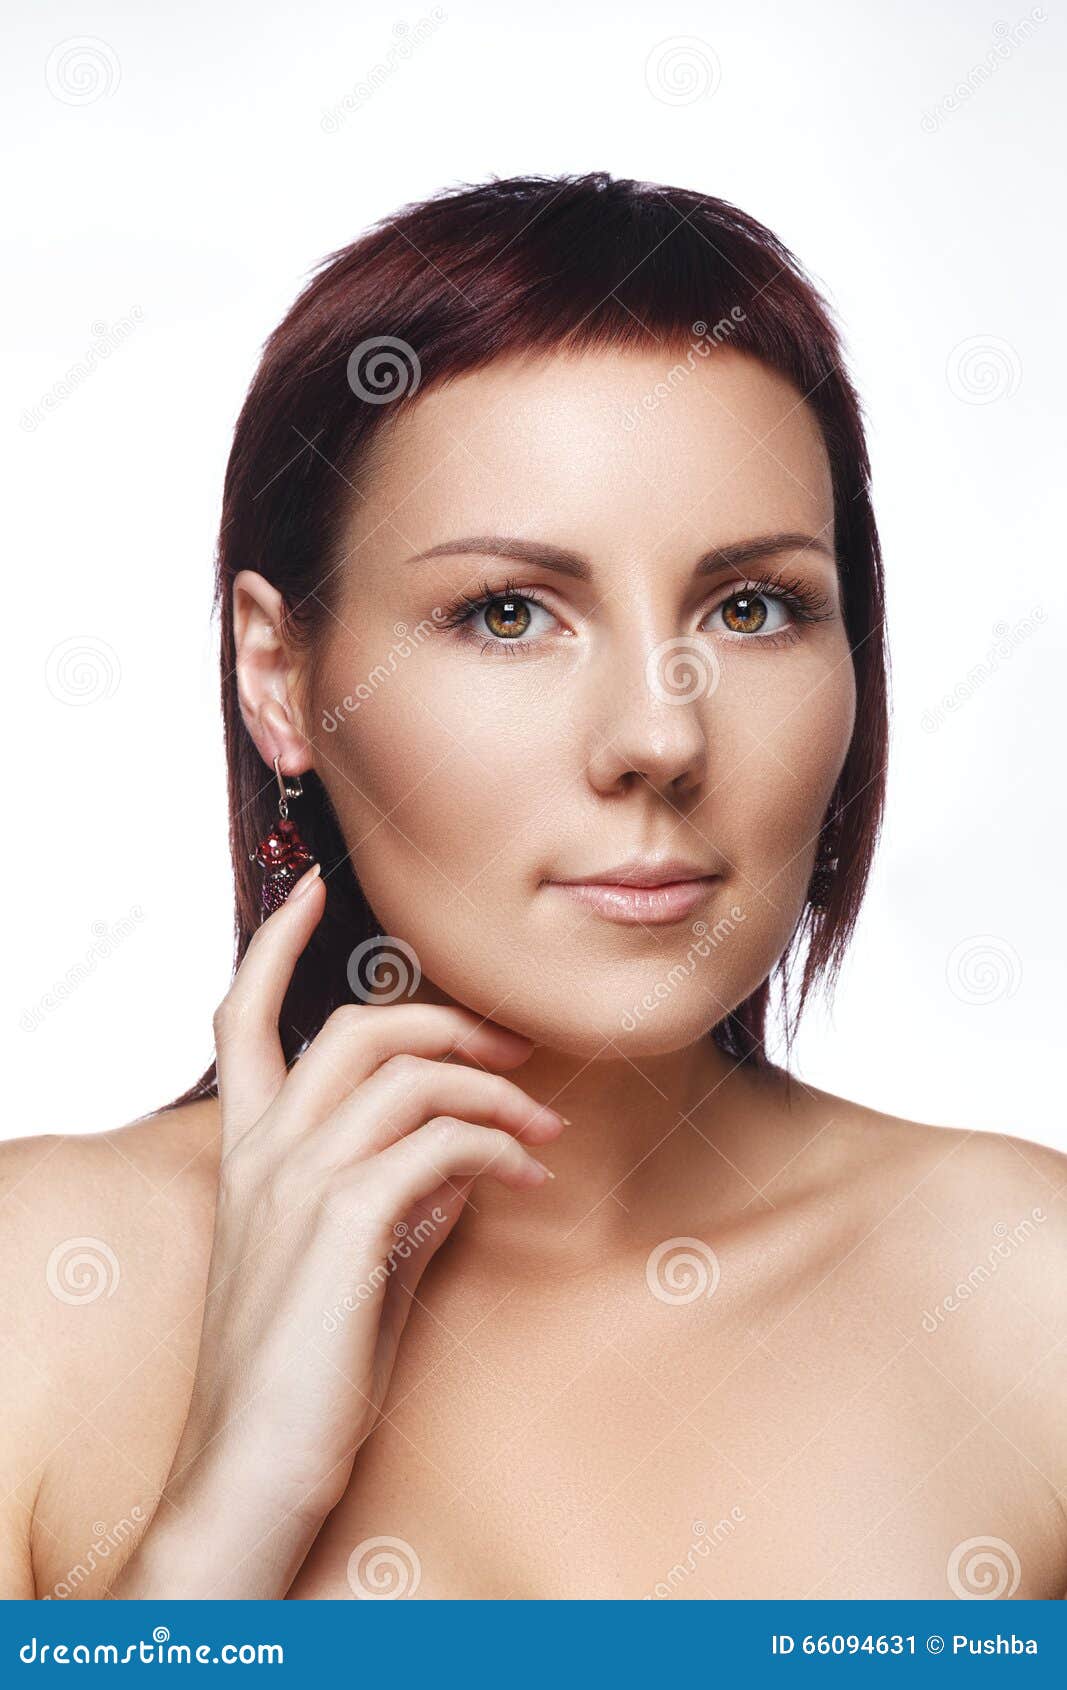 Young Brunette Girl With High Cheekbones On A White Background Stock Image Image Of Touching Hairstyle 66094631